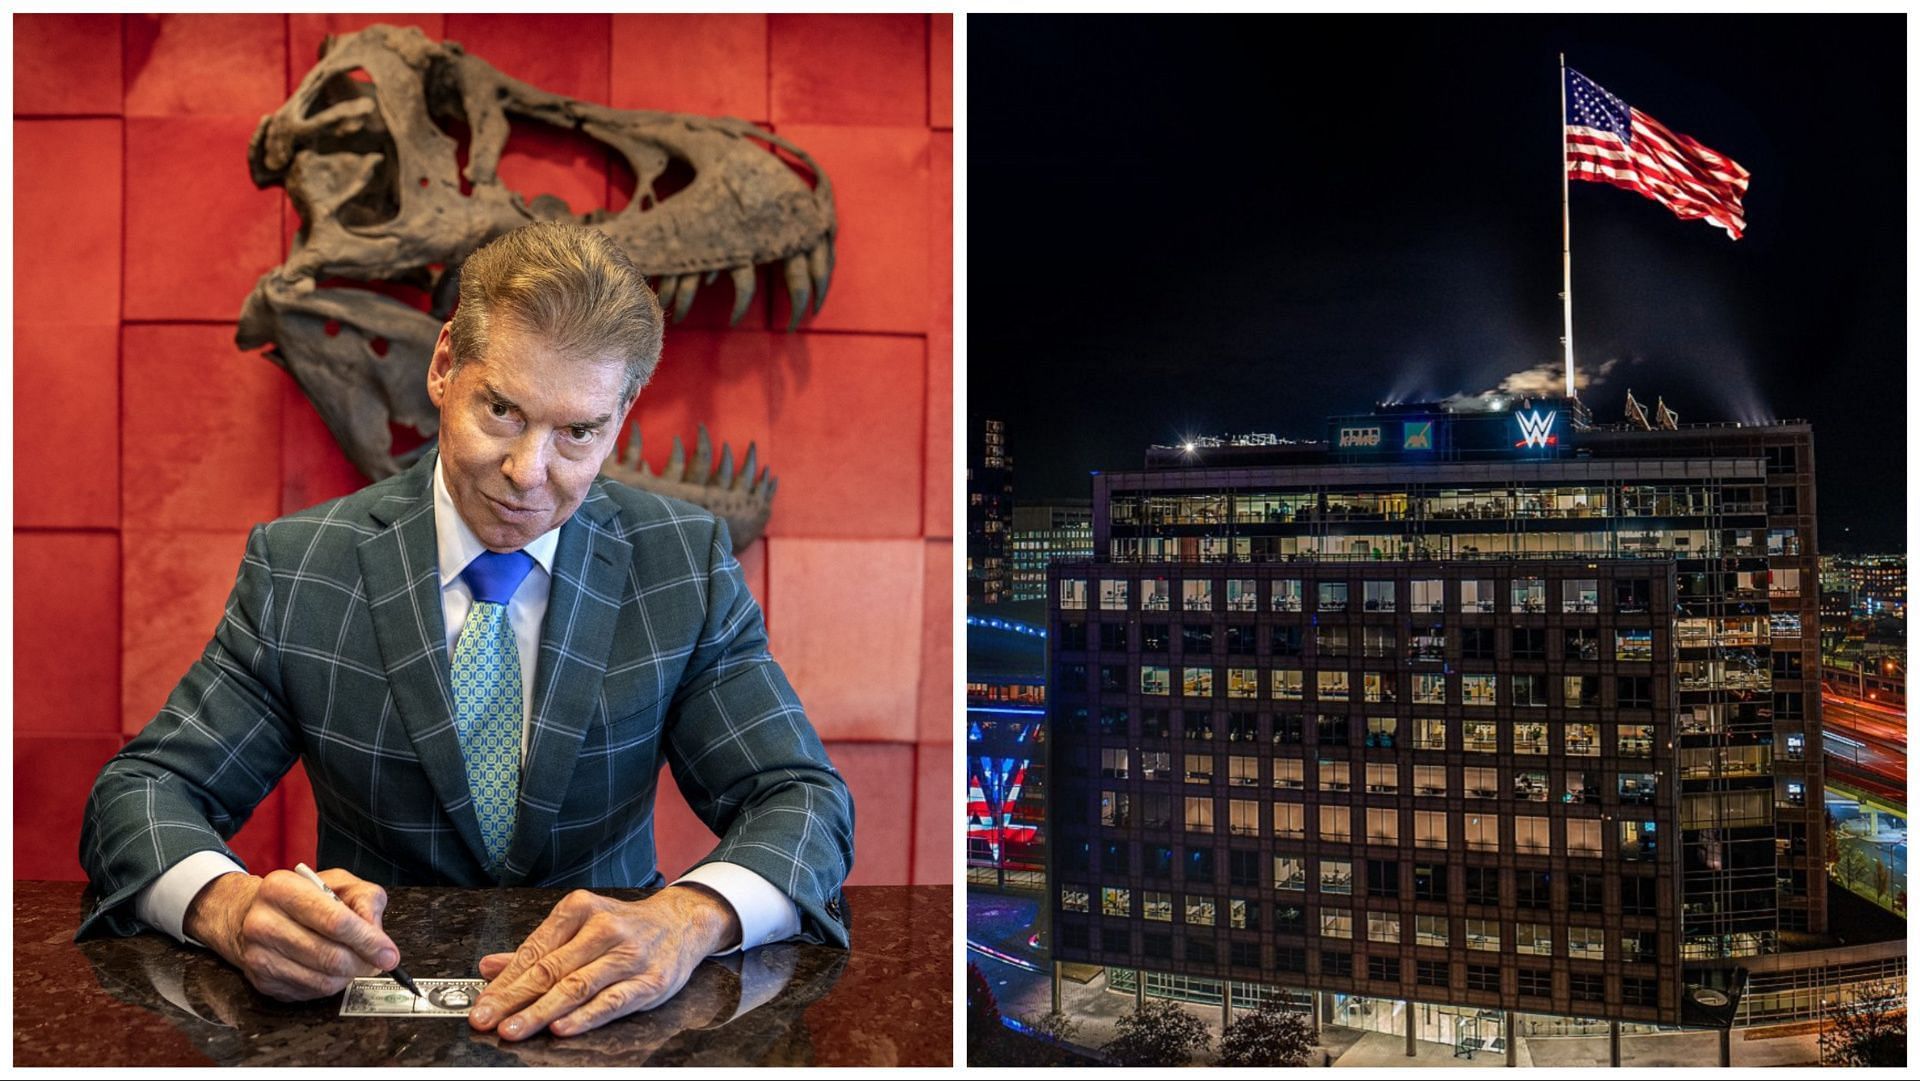 Vince McMahon in his former office at WWE HQ, the new WWE HQ building in Stamford